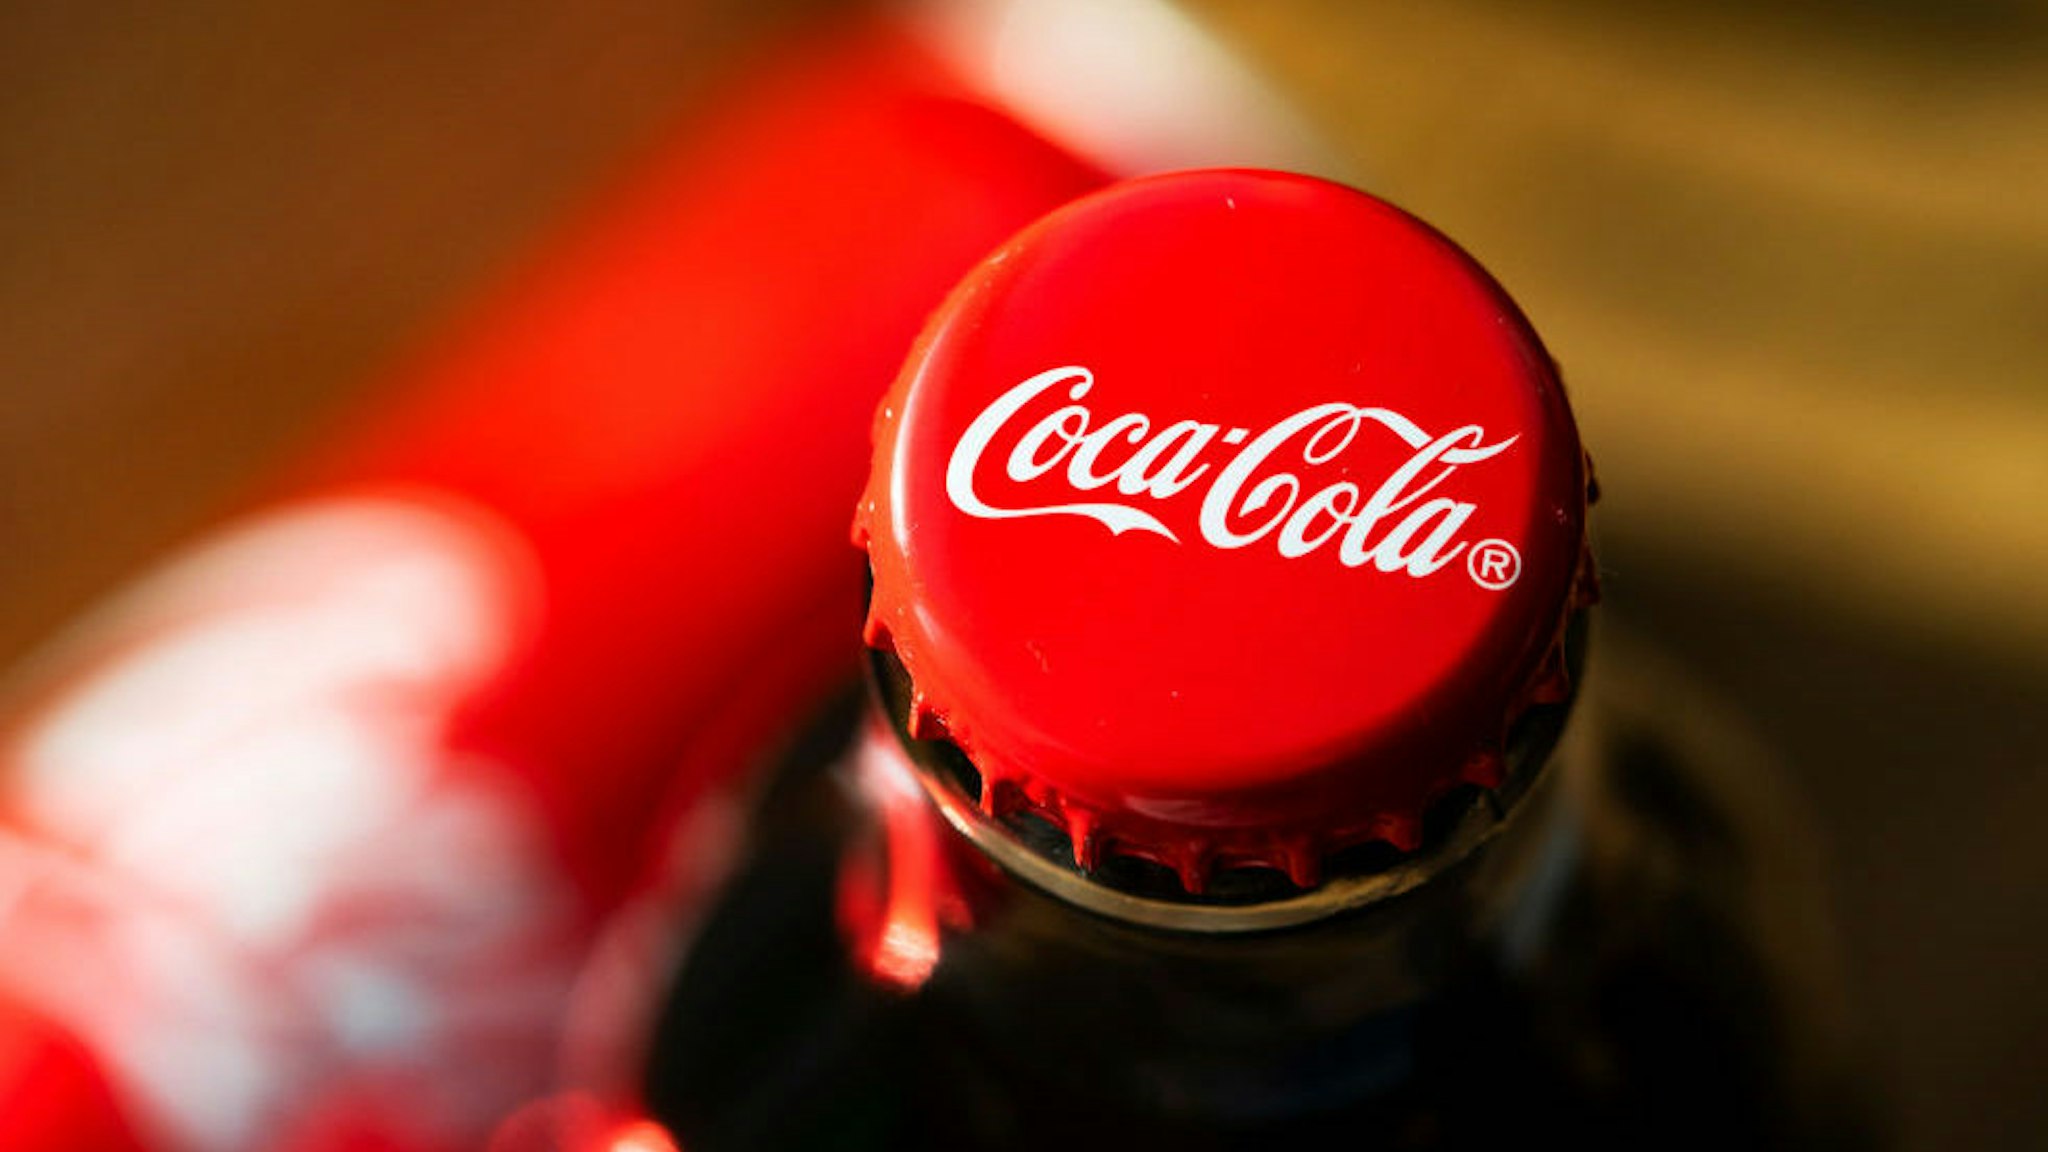 In this photo illustration a glass bottle of Coca-Cola seen displayed.